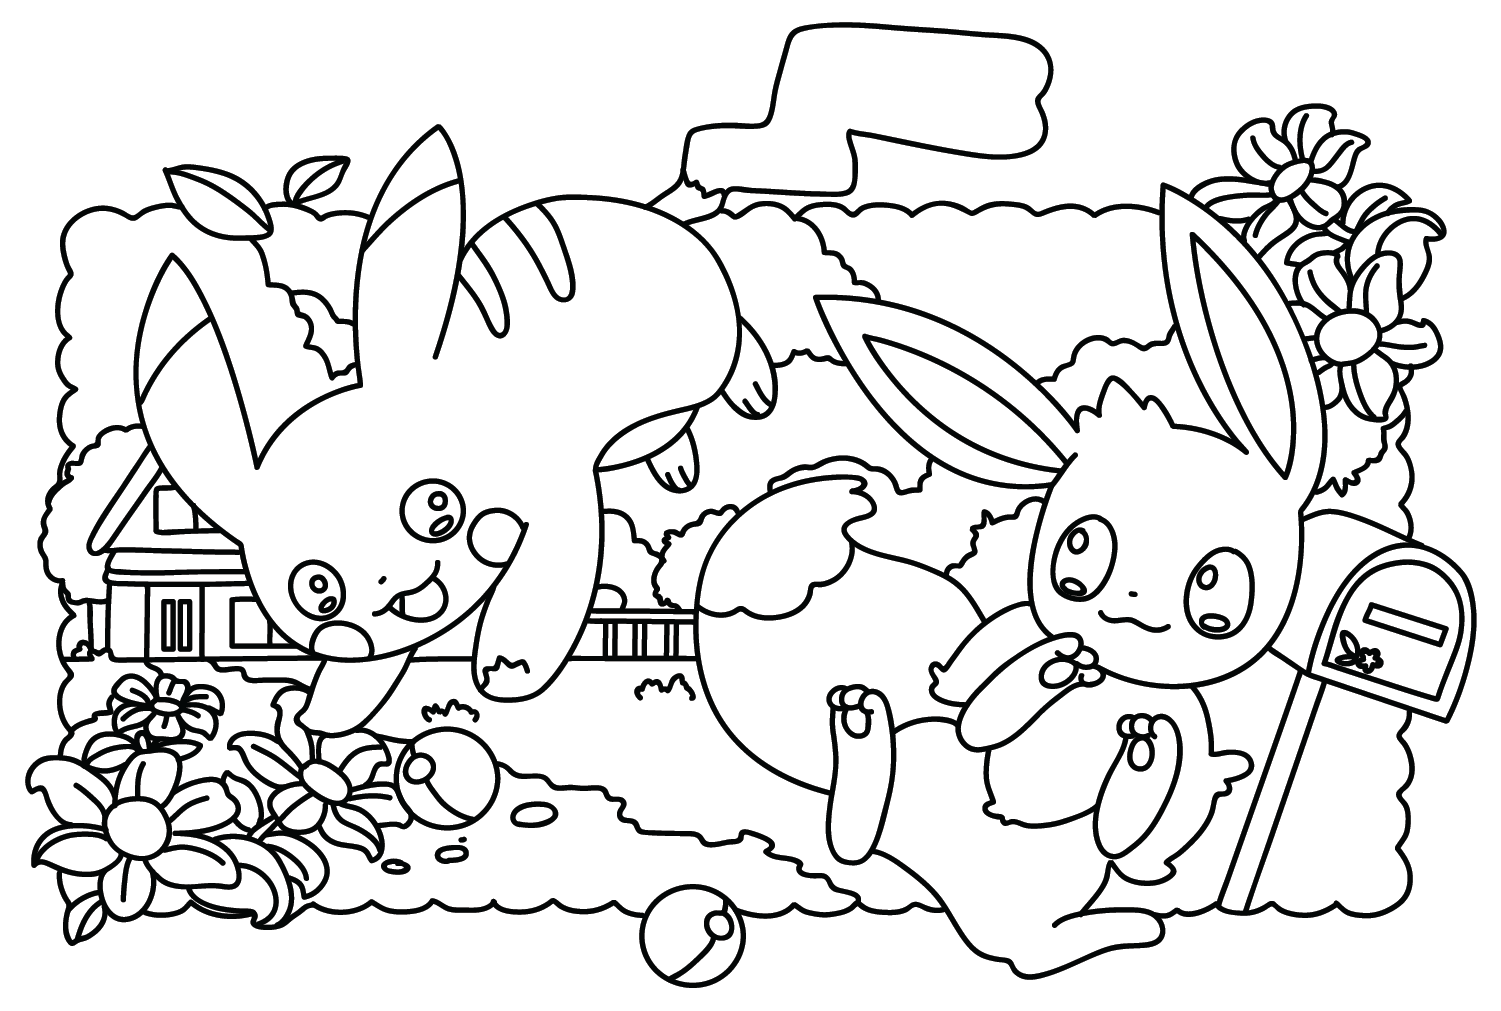 Eevee and Pikachu Pokemon Coloring Page